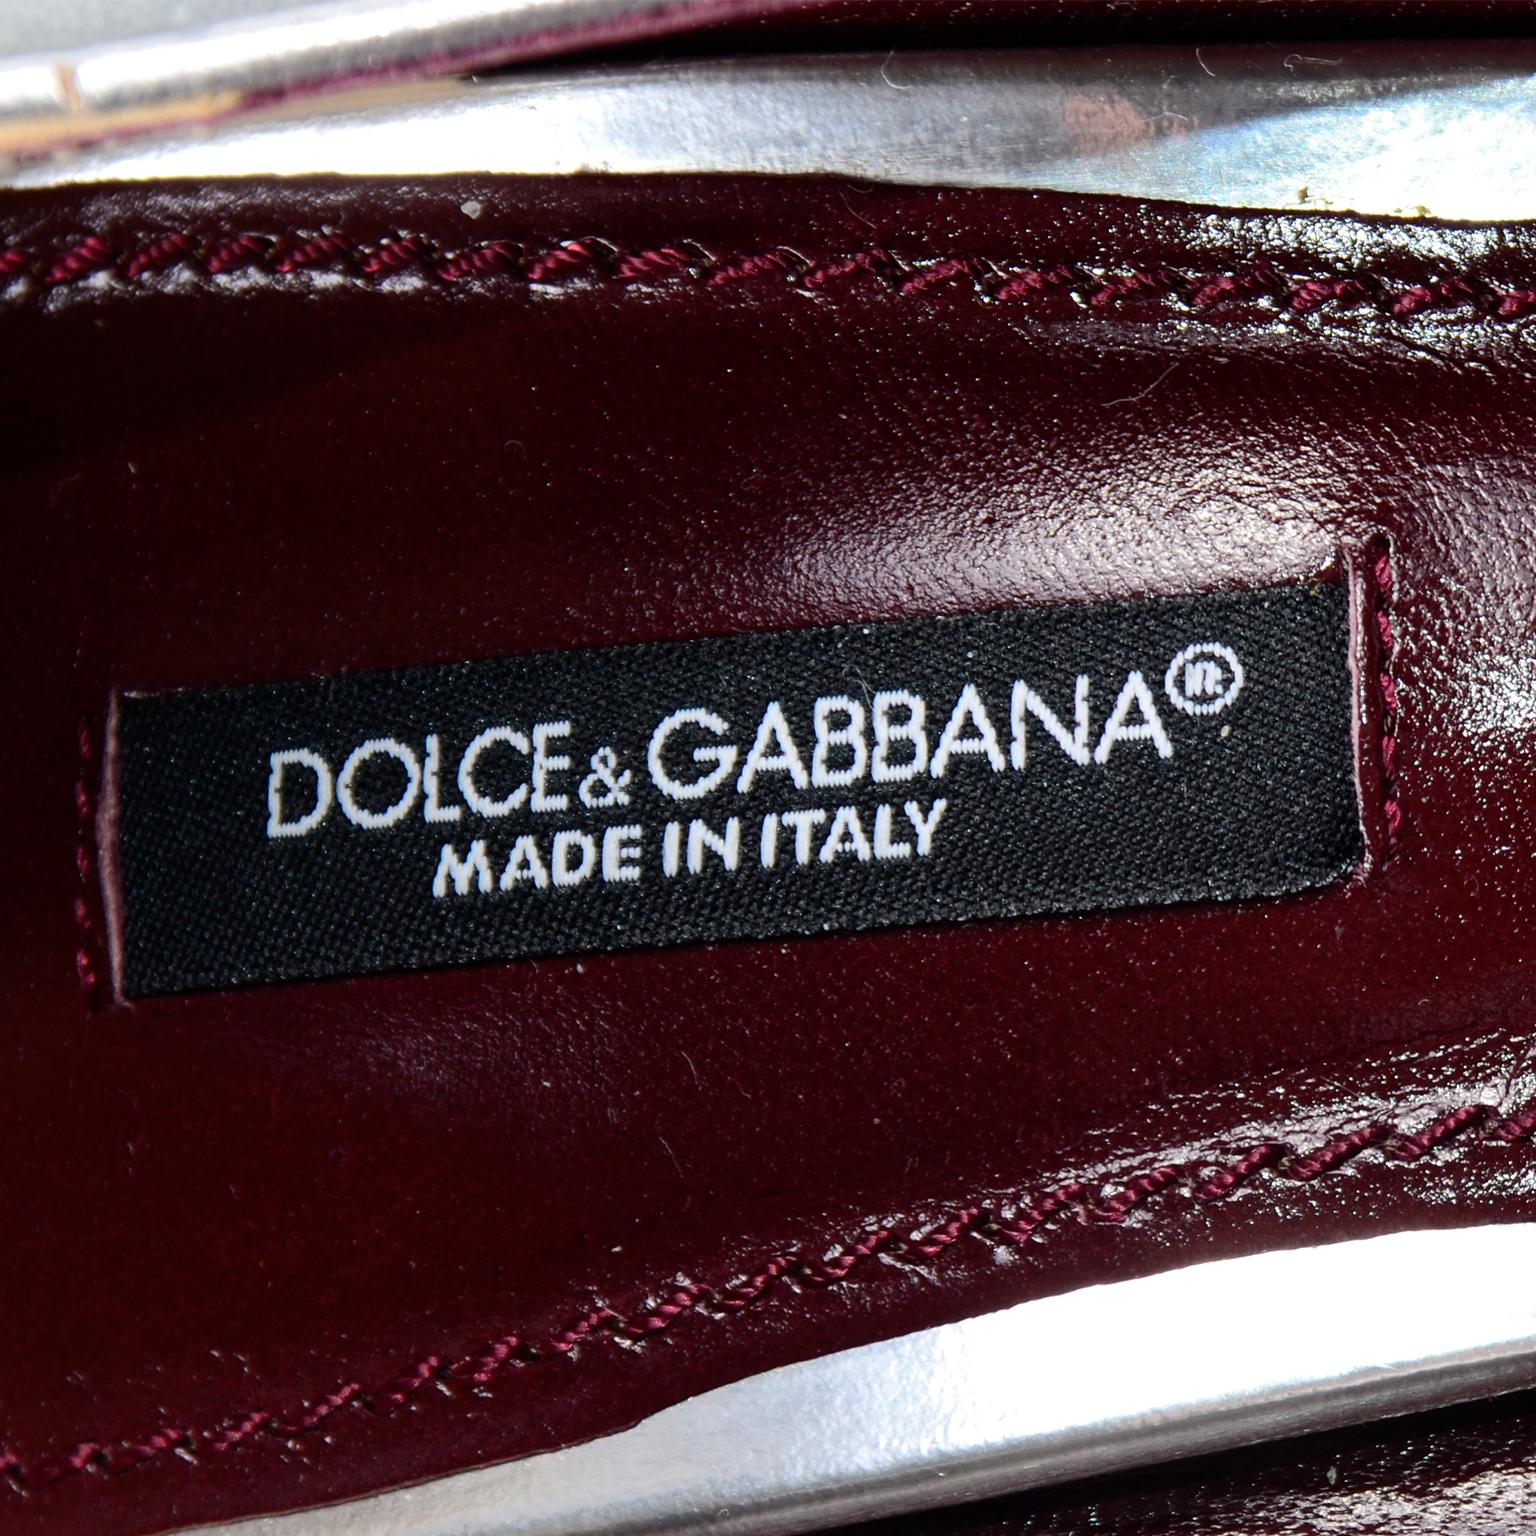 Dolce & Gabbana Shoes in Silver Leather & Suede & Pointed Toes w Heels For Sale 2